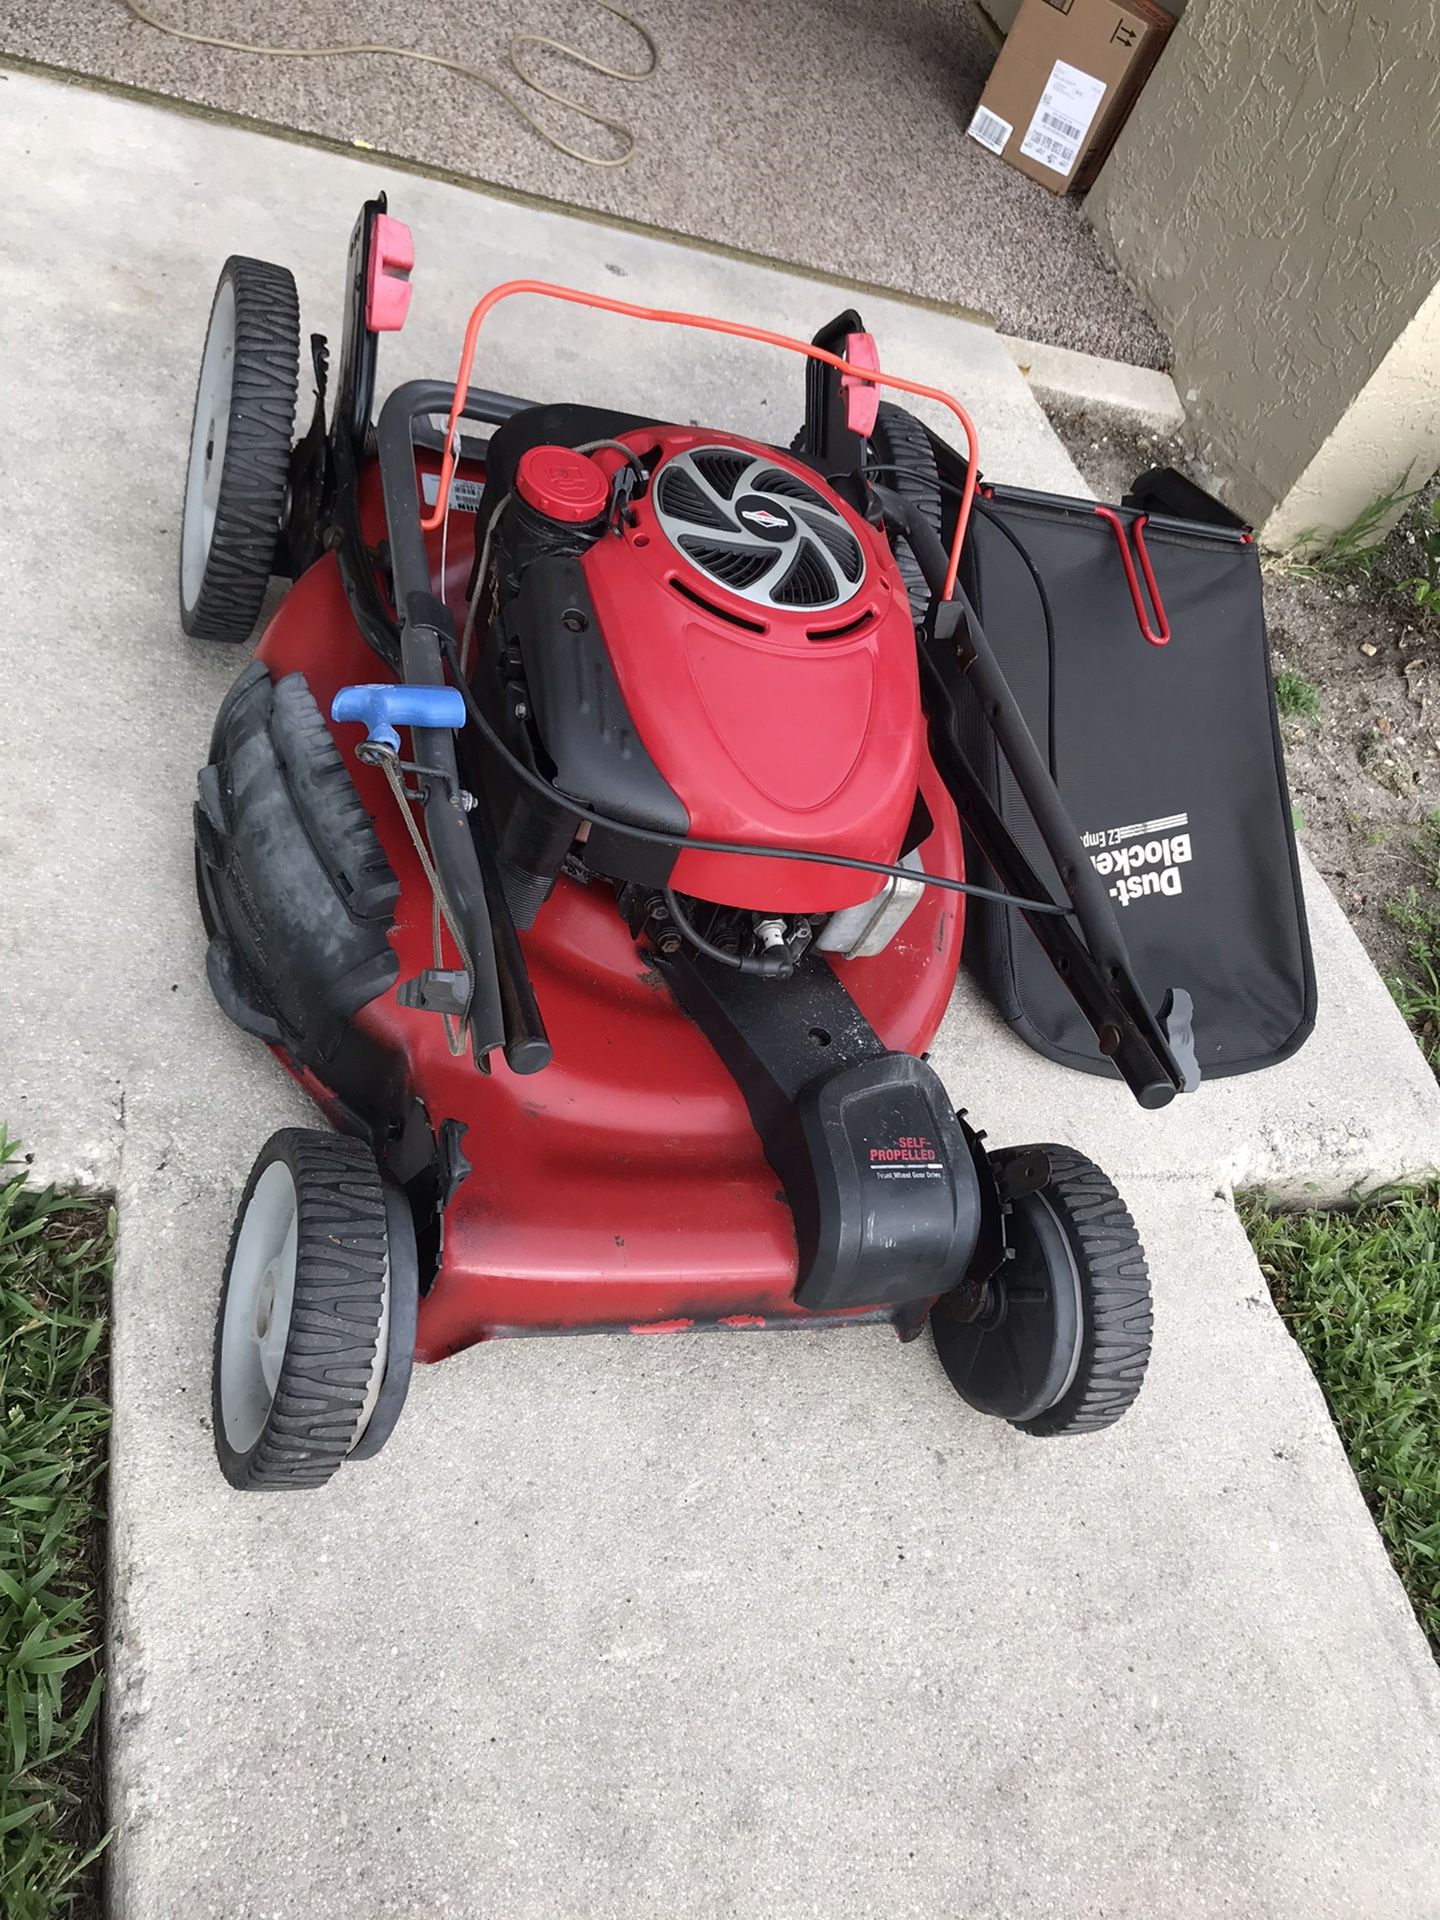 Craftsman Mower. Good Condition Works Great. Bag Not Included